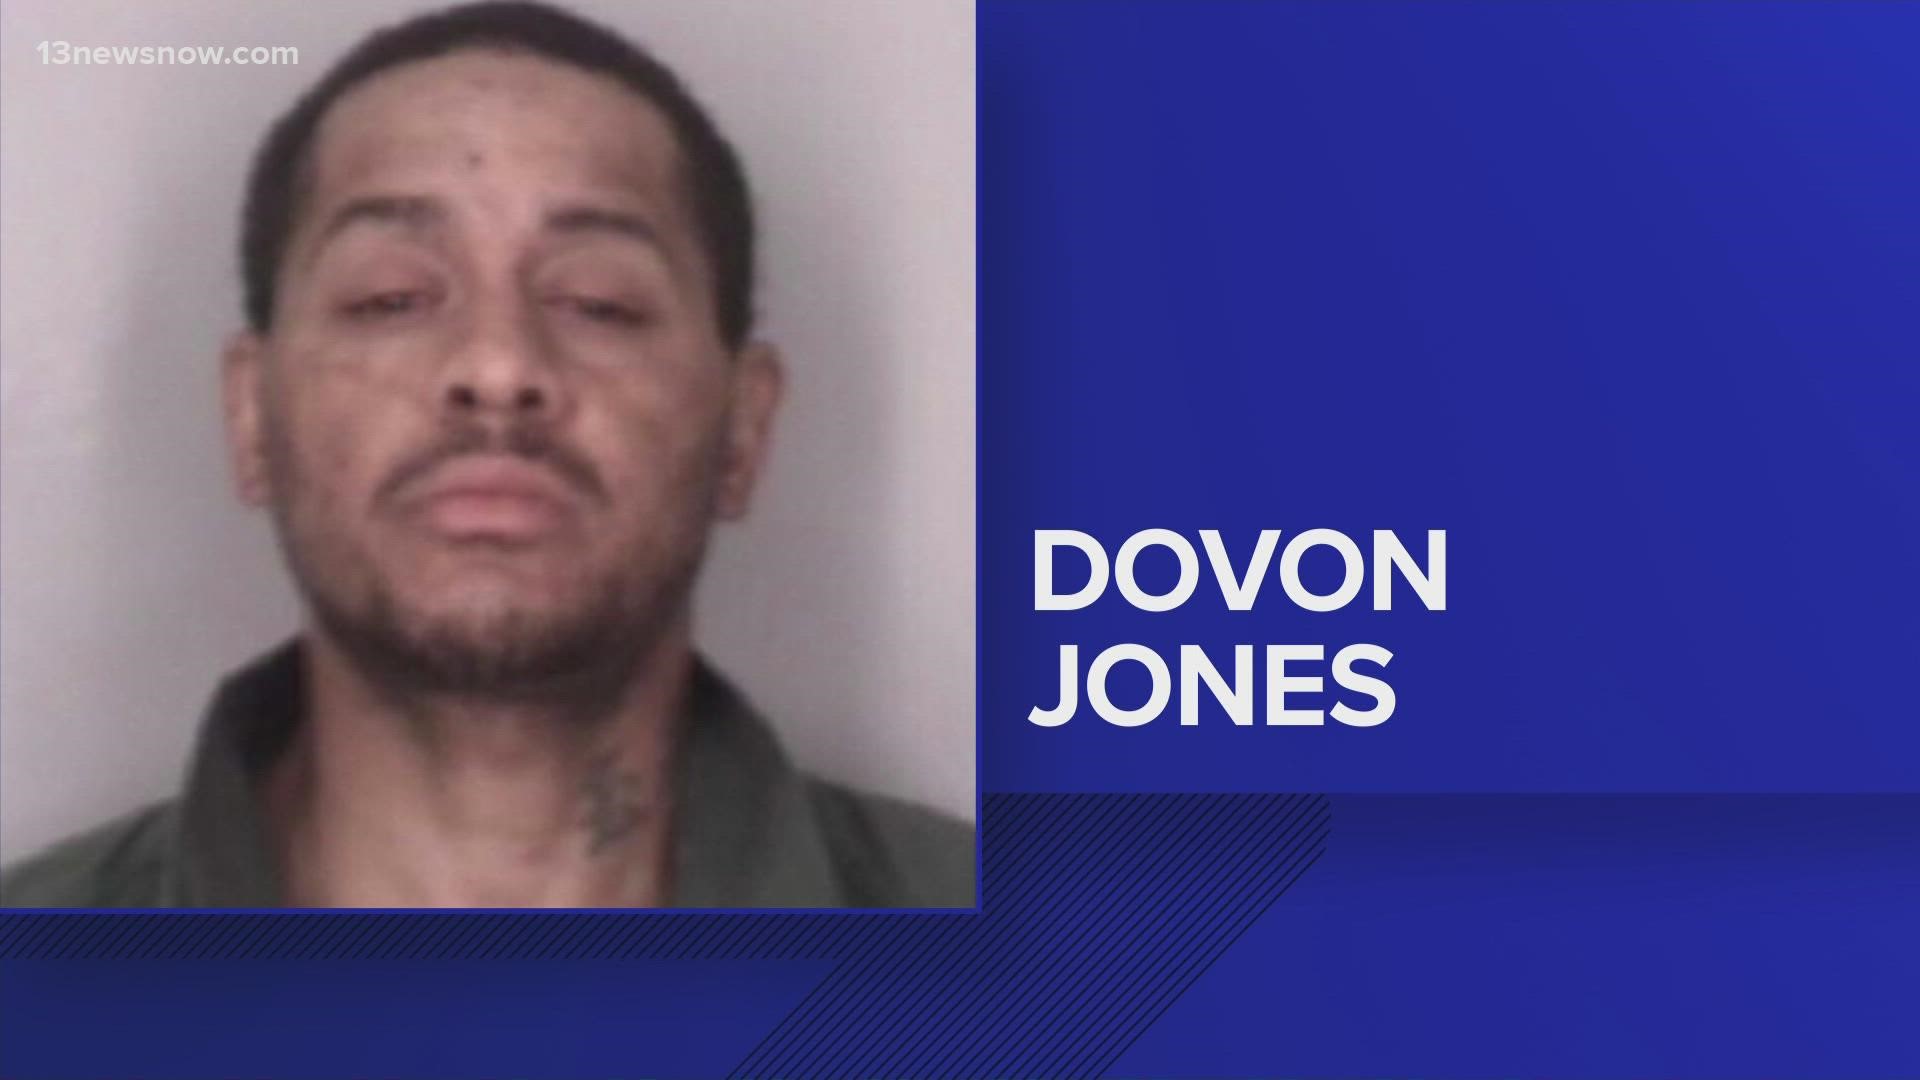 The man escaped the Portsmouth City jail Wednesday, and officials said the search would not end until they found him.